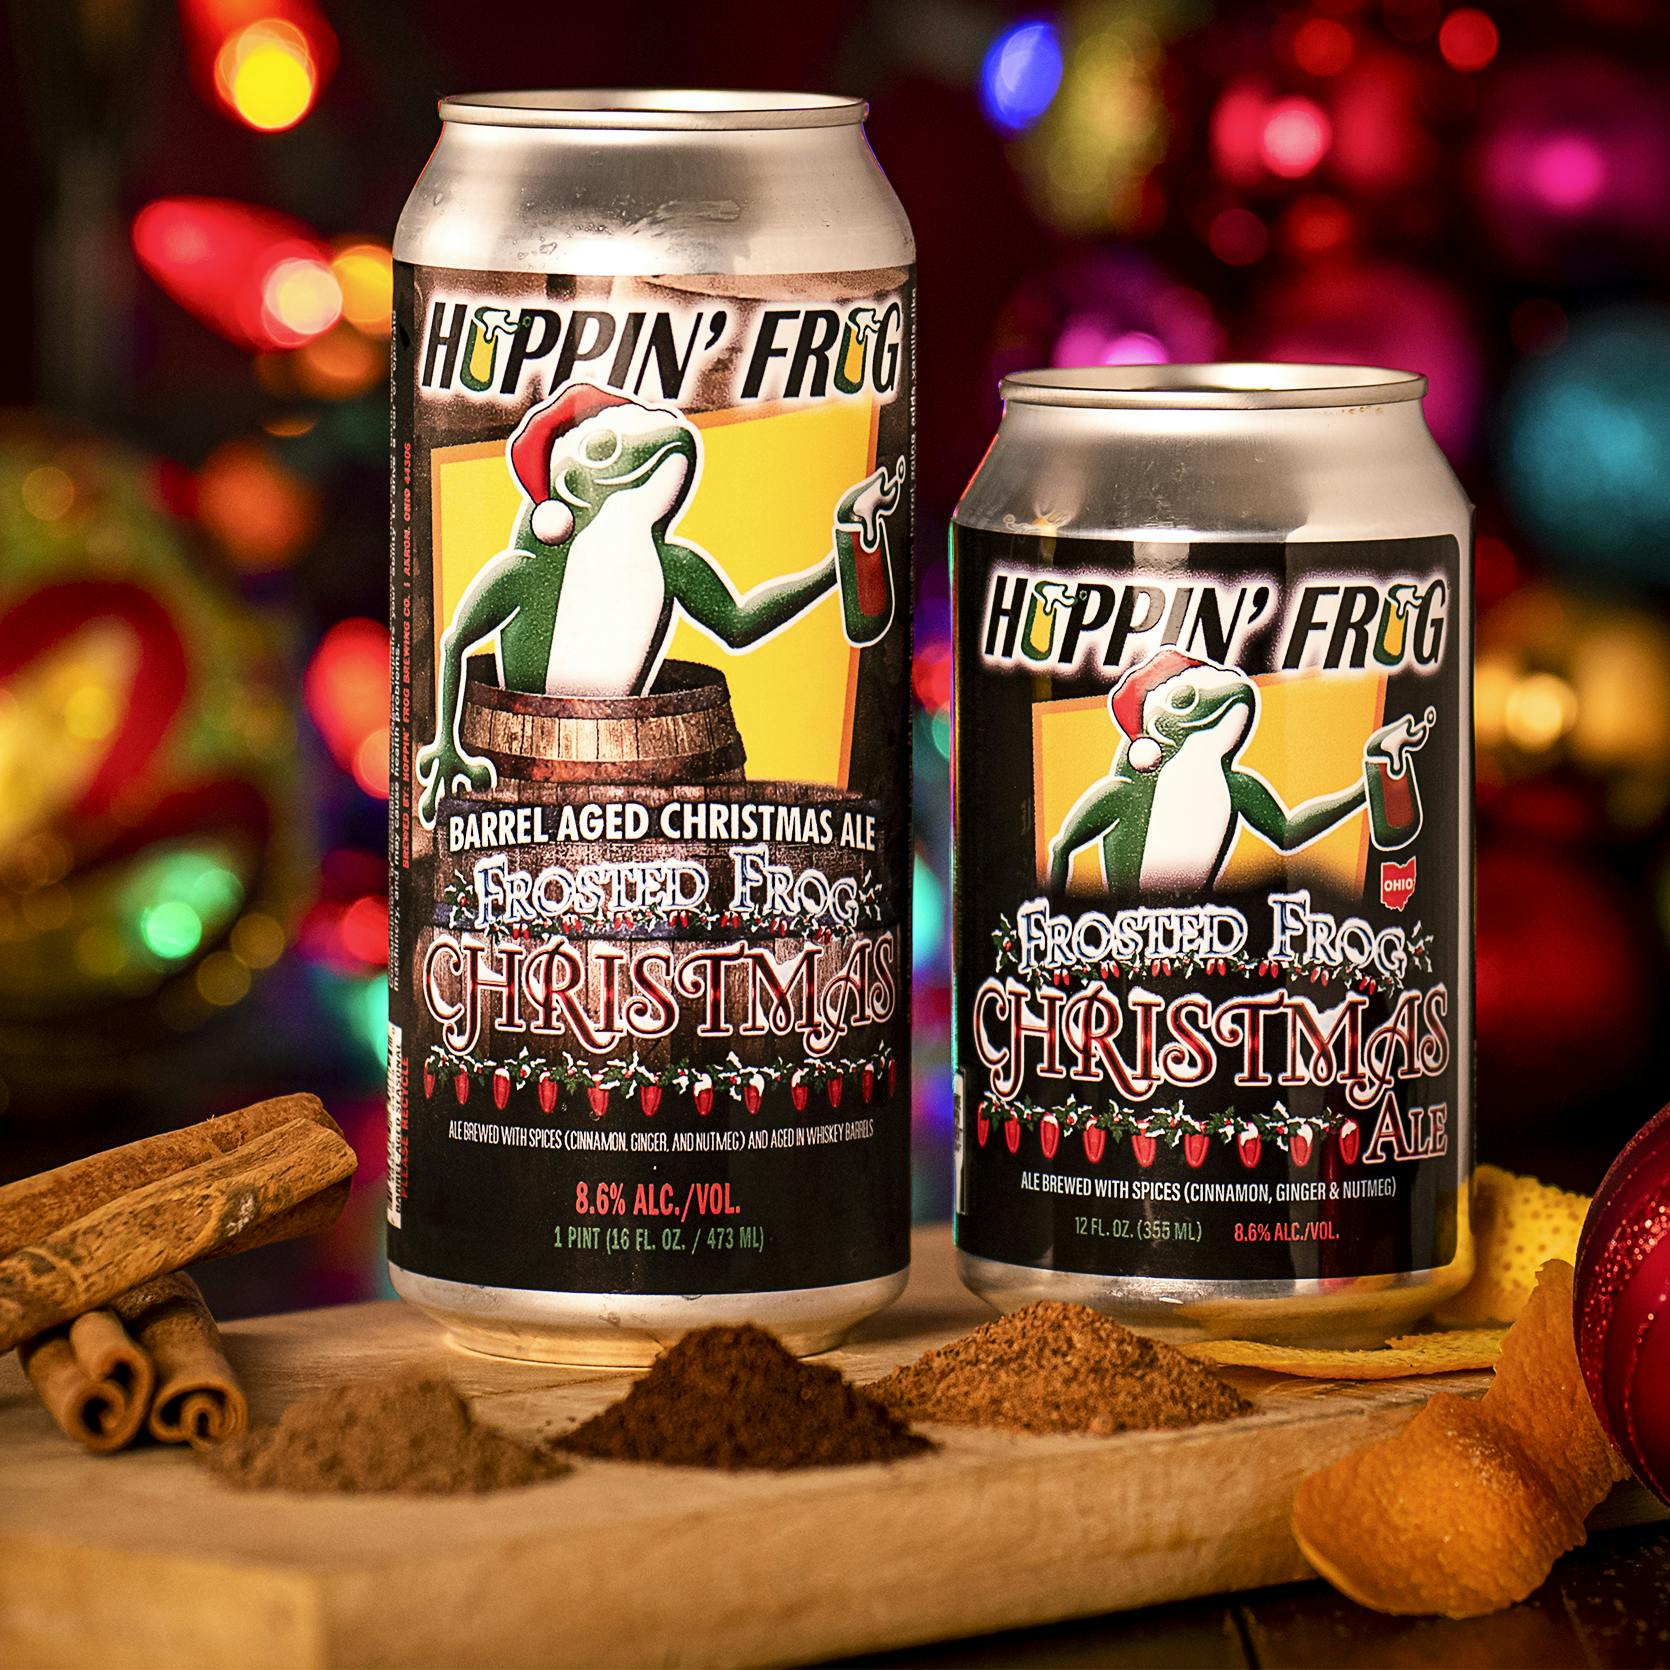 Bourbon Barrel-Aged & Original Frosted Frog Christmas Ales are